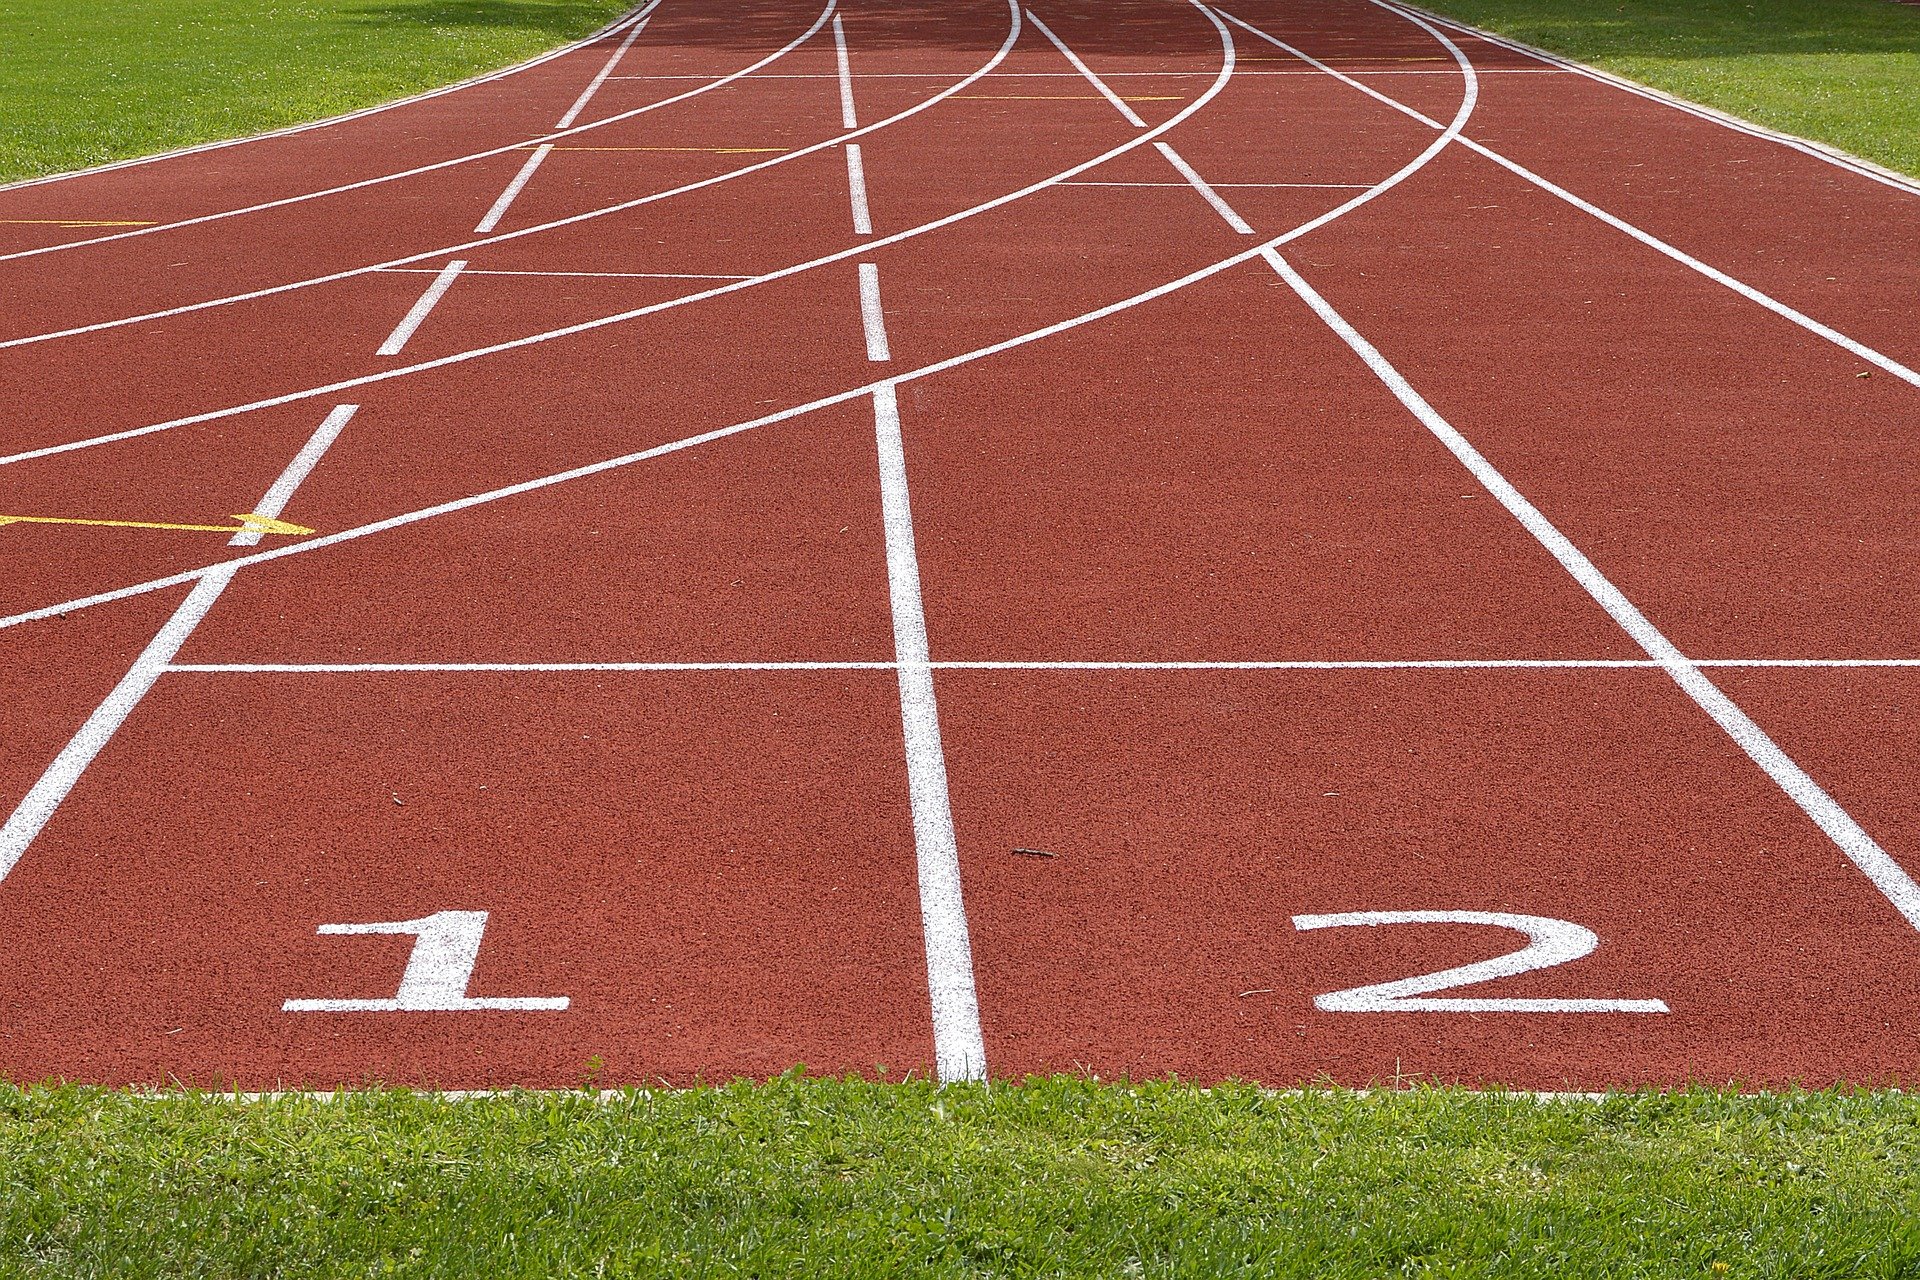 What was he doing with a long pole on the track field? | Photo: Pixabay/anncapictures 